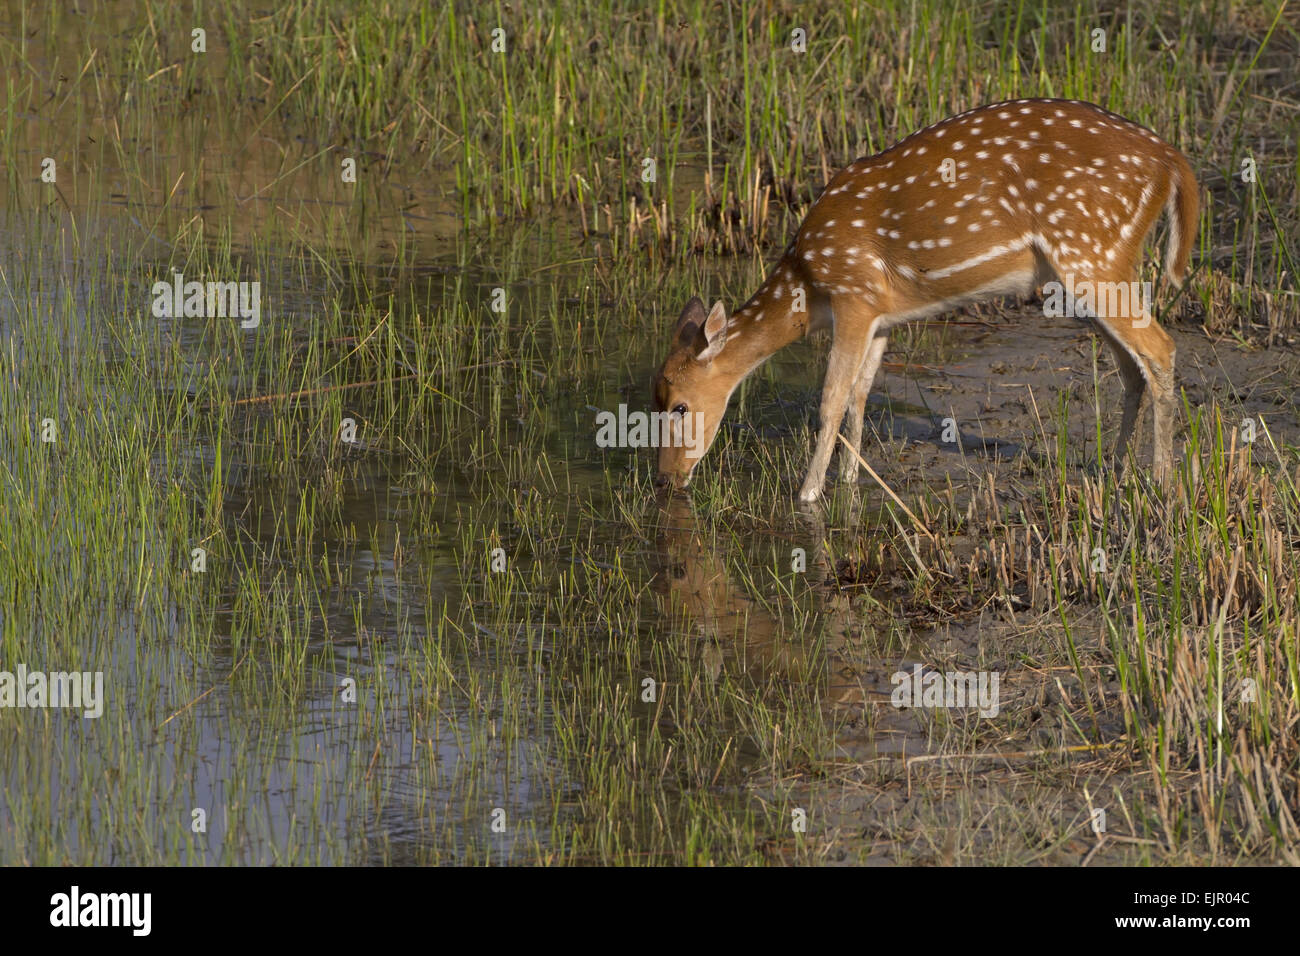 Spotted Deer (Axis axis) adult female, drinking at waterhole, Sundarbans, Ganges Delta, West Bengal, India, March Stock Photo